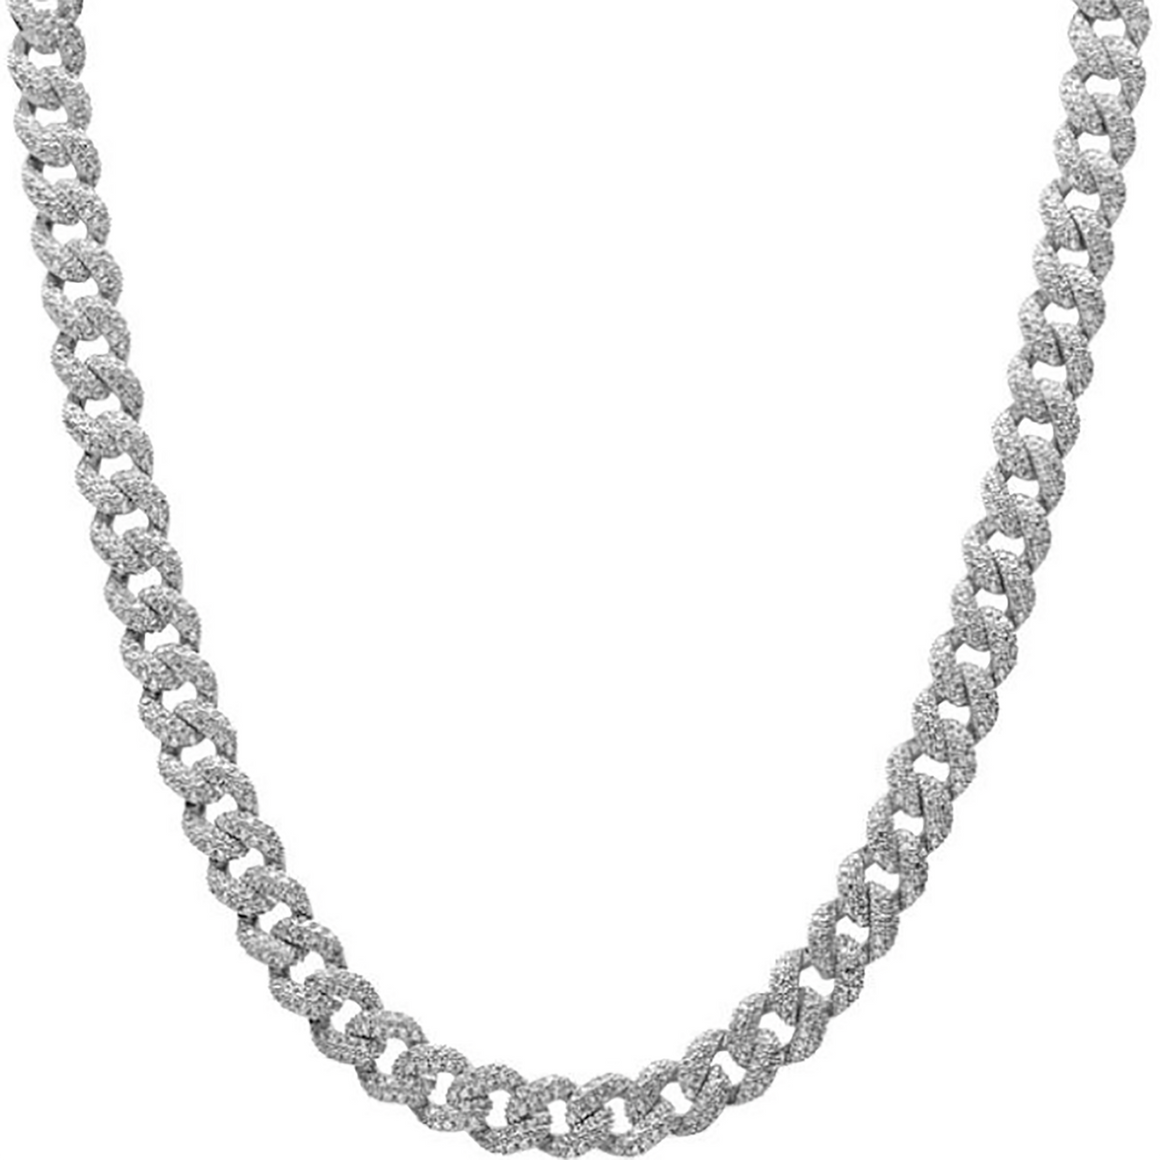 54 FLORAL 10mm ICED TENNIS CRYSTAL DIAMOND CURB NECKLACE CHAIN - SILVER